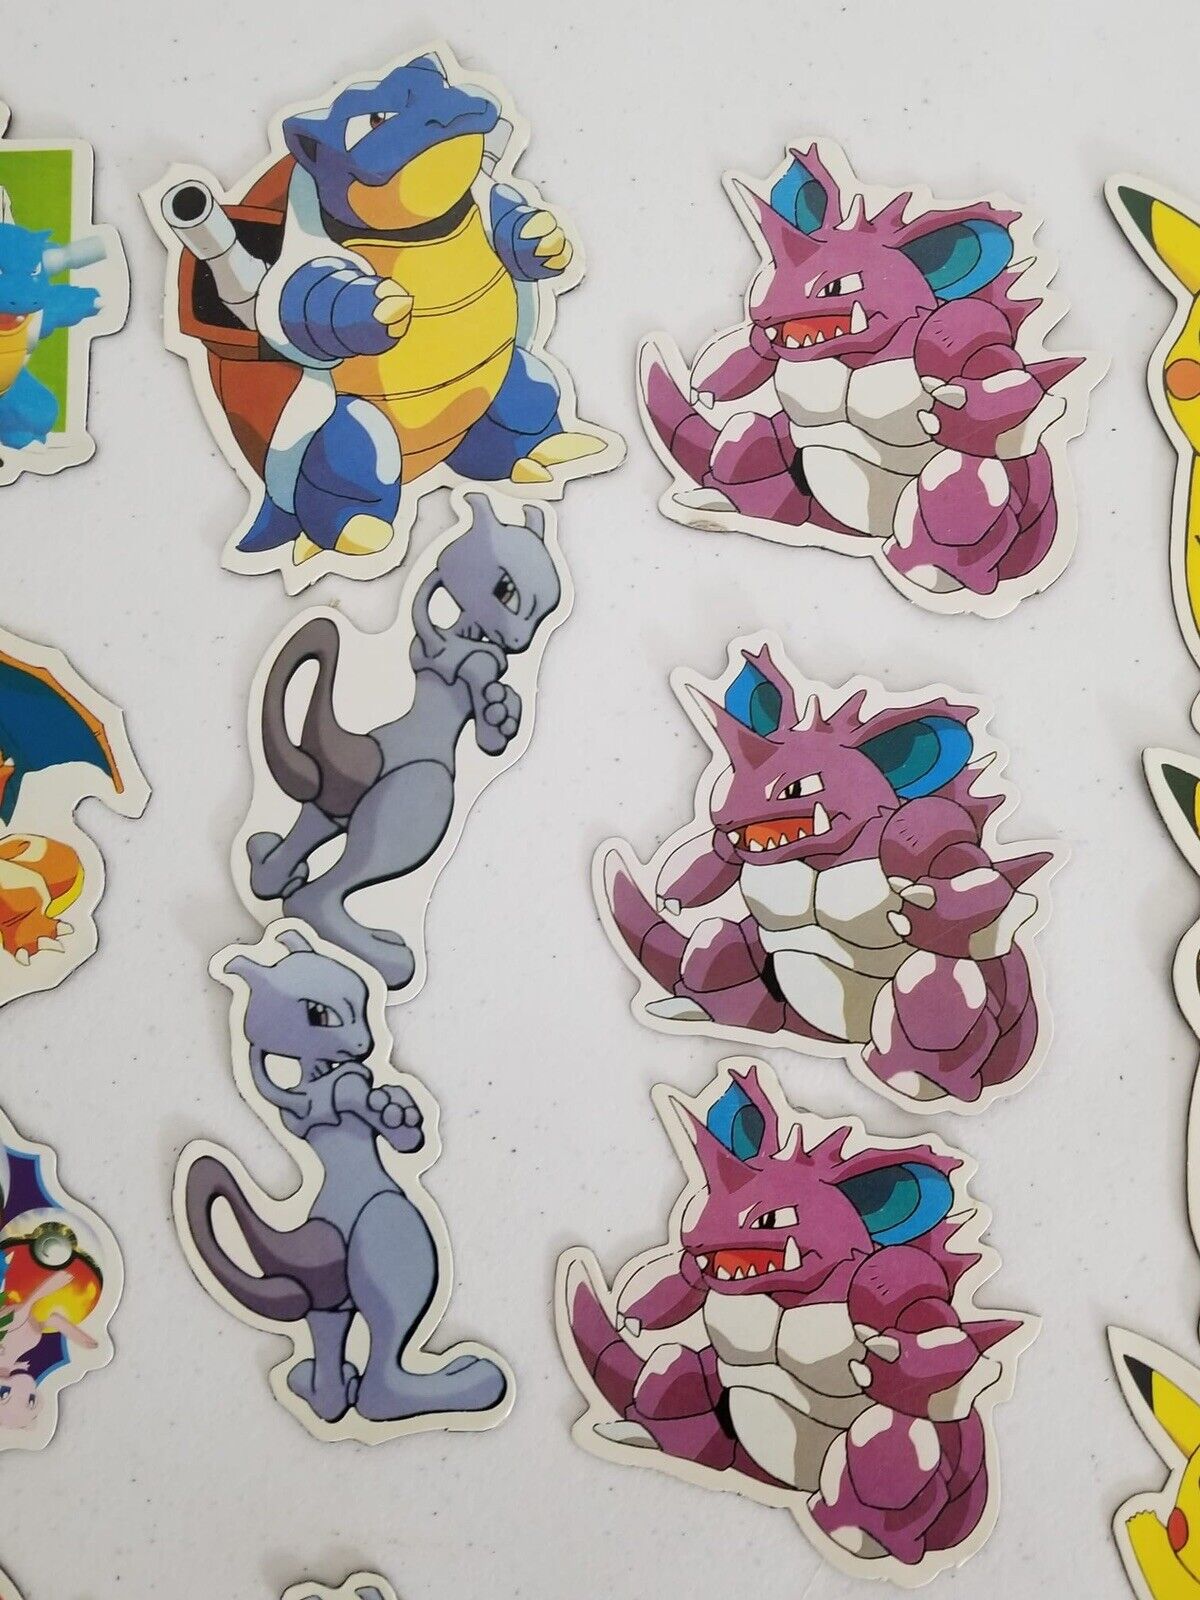 Vintage 1990s Pokemon Magnets Collection - 30pc Lot featuring Pikachu, Charizard, Mewtwo - 3-4" Size - TreasuTiques